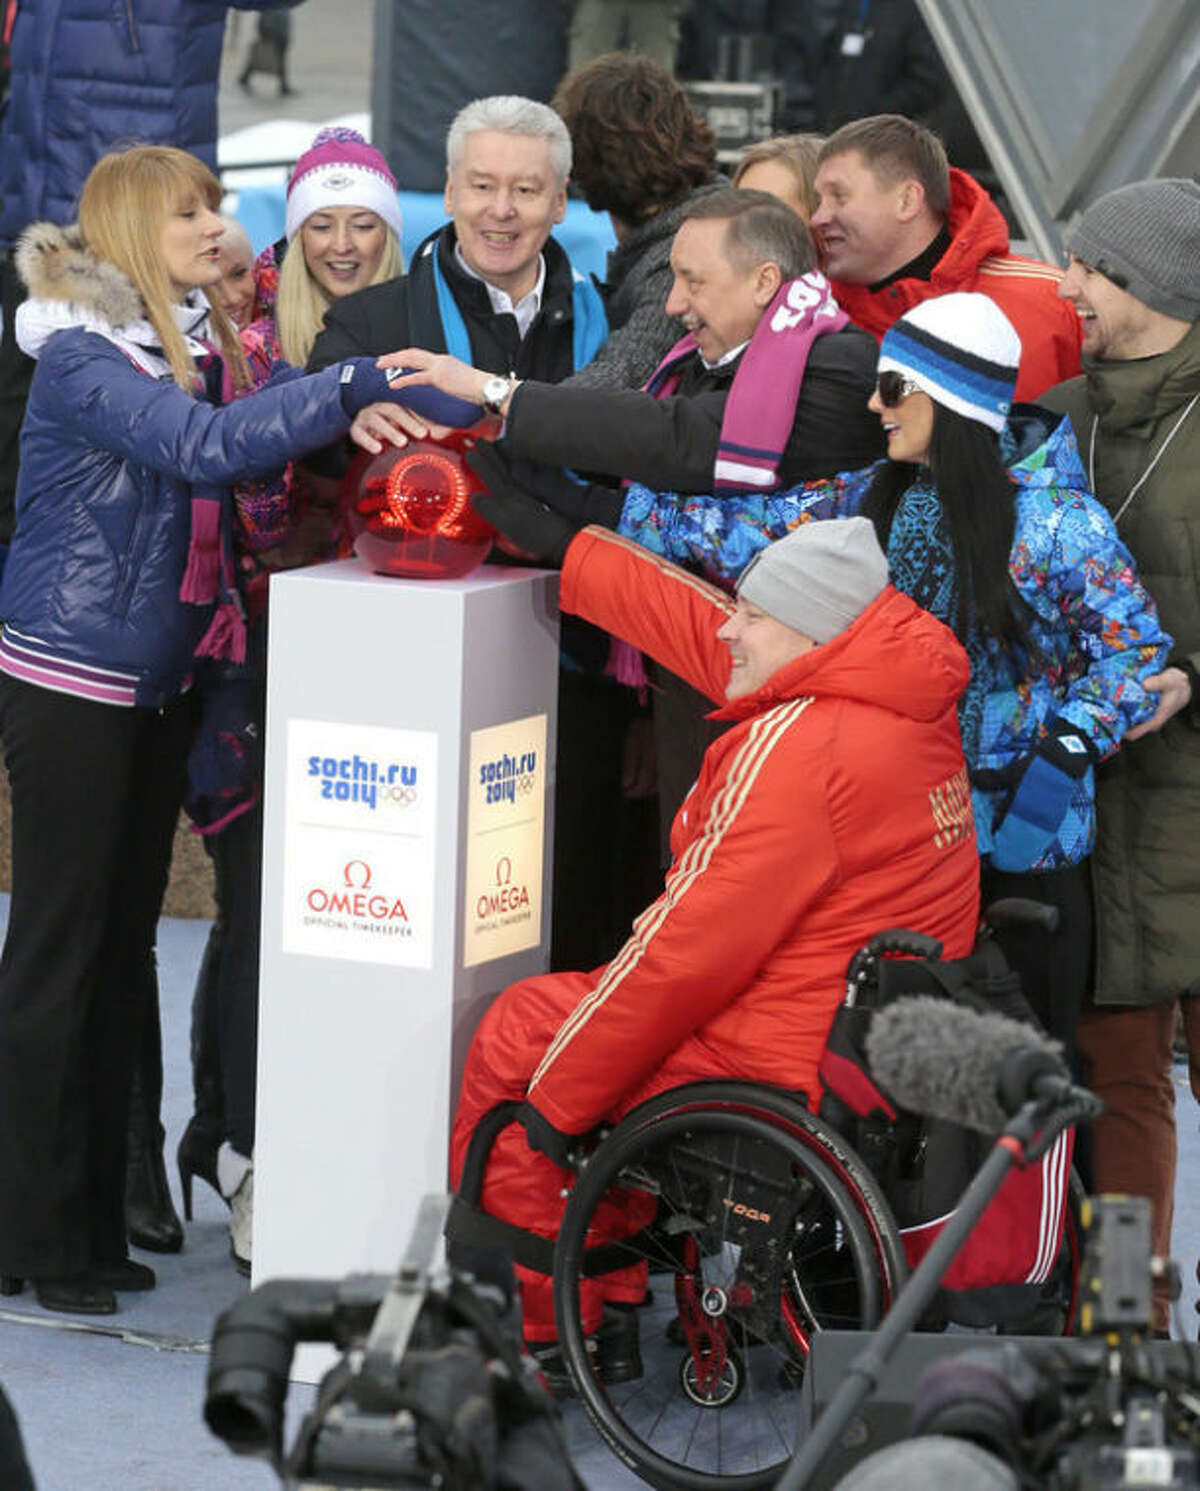 Moscow's Mayor Sergei Sobyanin, center, surrounded by various sport enthusiasts and entertainers hits a symbolic button to launch the one-year count down clock for the upcoming 2014 Sochi Olympics in Moscow, Russia, Thursday, Feb. 7, 2013. (AP Photo/Mikhail Metzel)